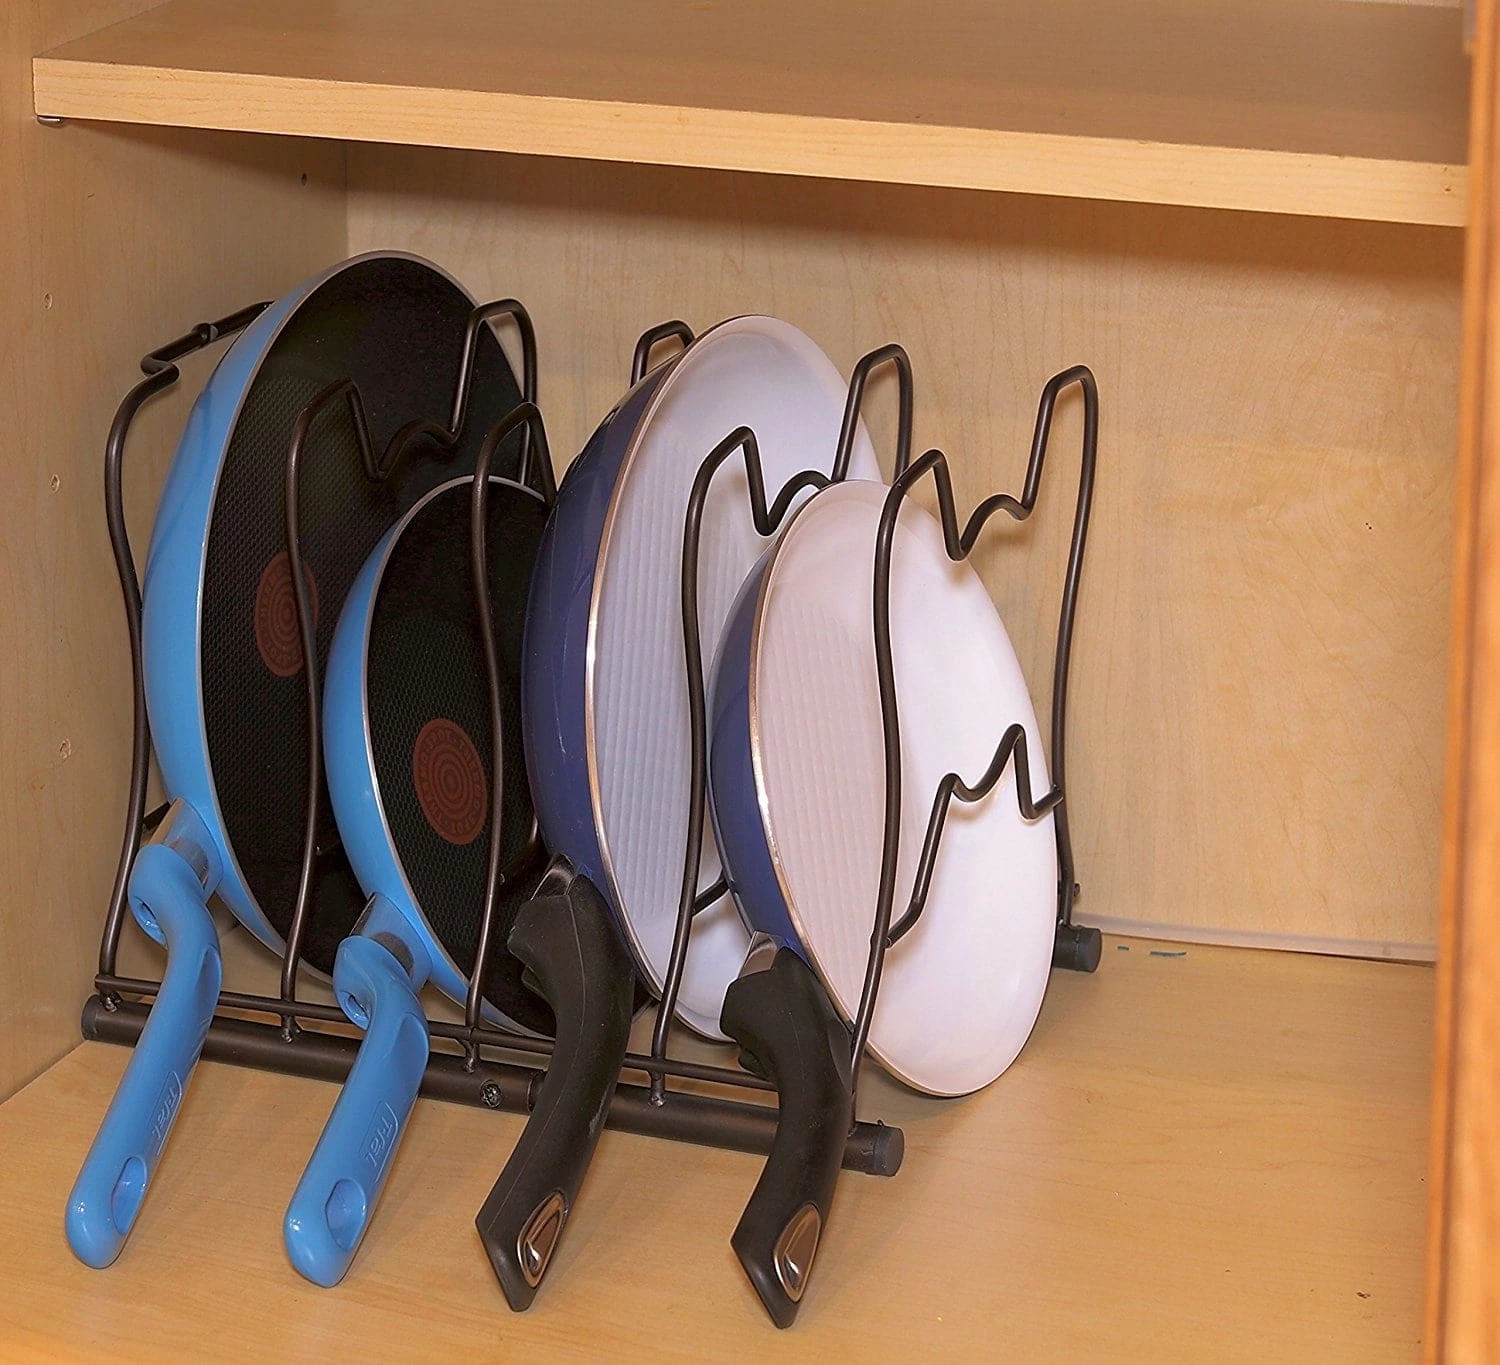 How to Organize your Pots and Pans - Make your cabinet space more efficient with these tips - In cabinet pot holder